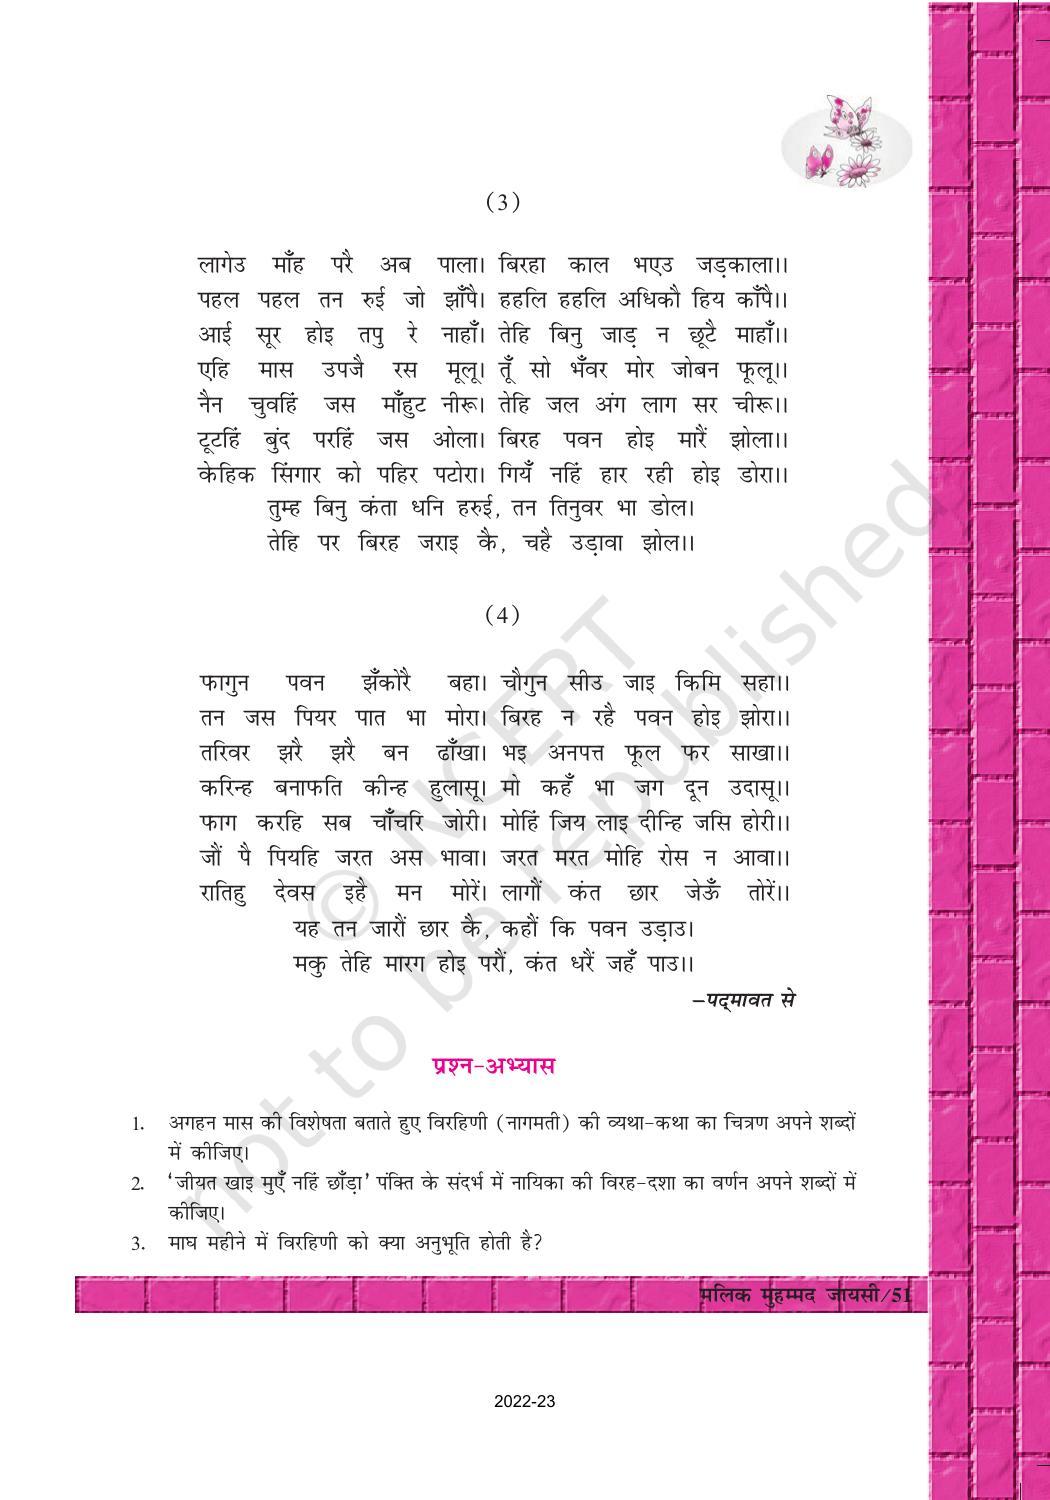 NCERT Book for Class 12 Hindi Antra Chapter 8 मलिक मुहम्मद जायसी - Page 4